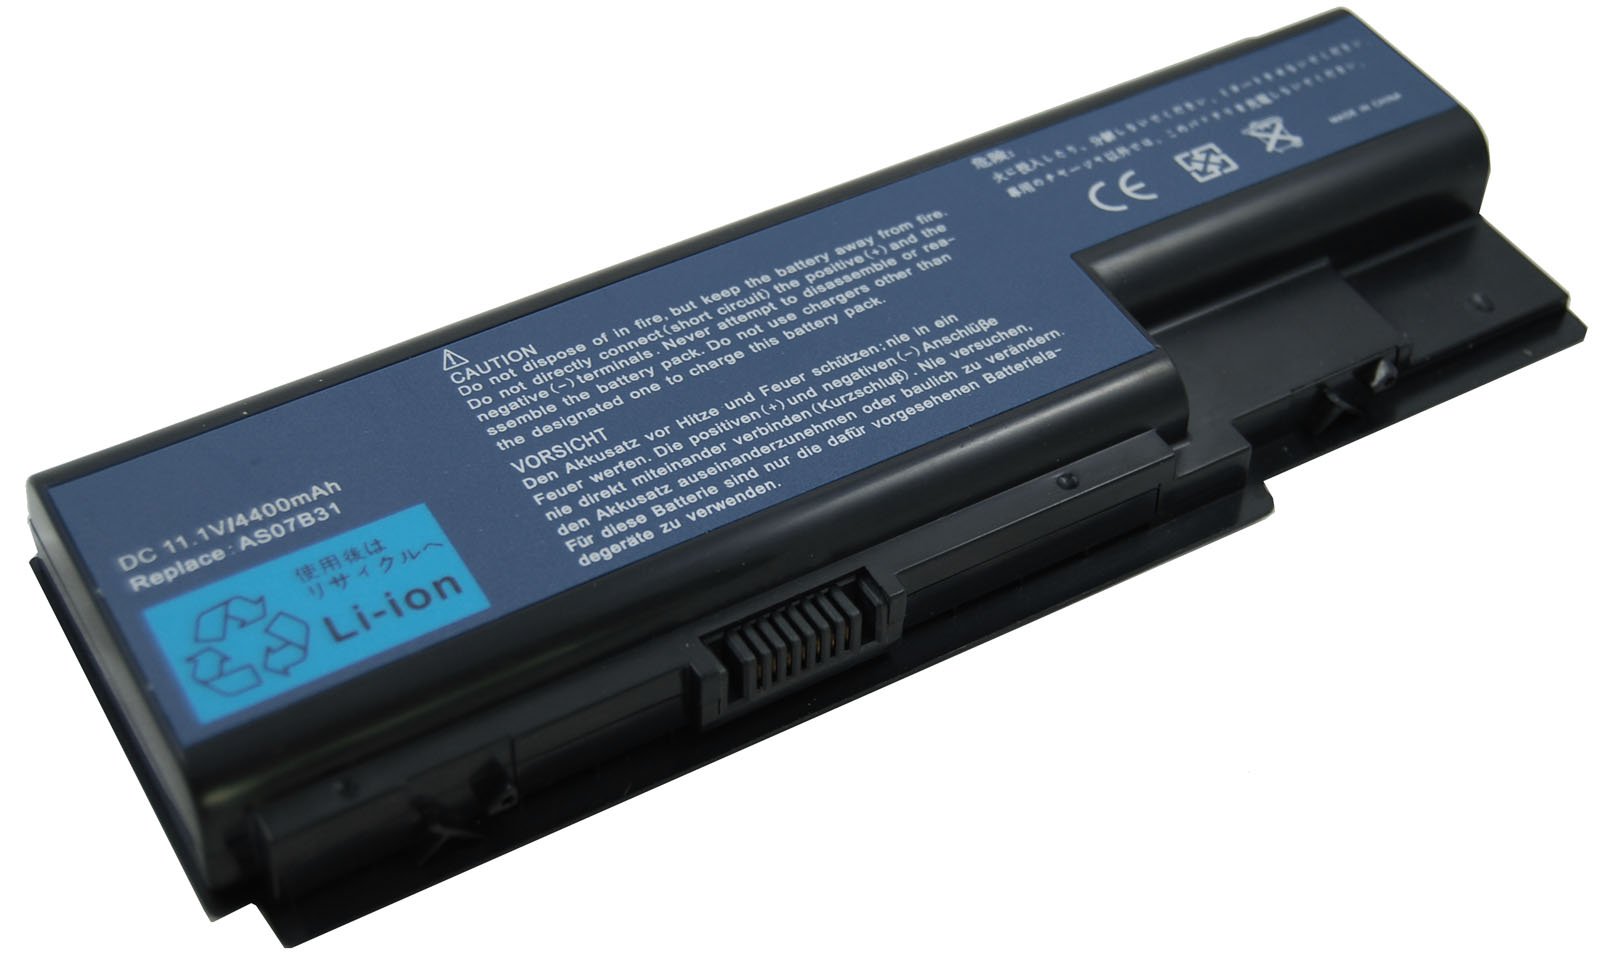 Hasee Laptop battery repair/replacement